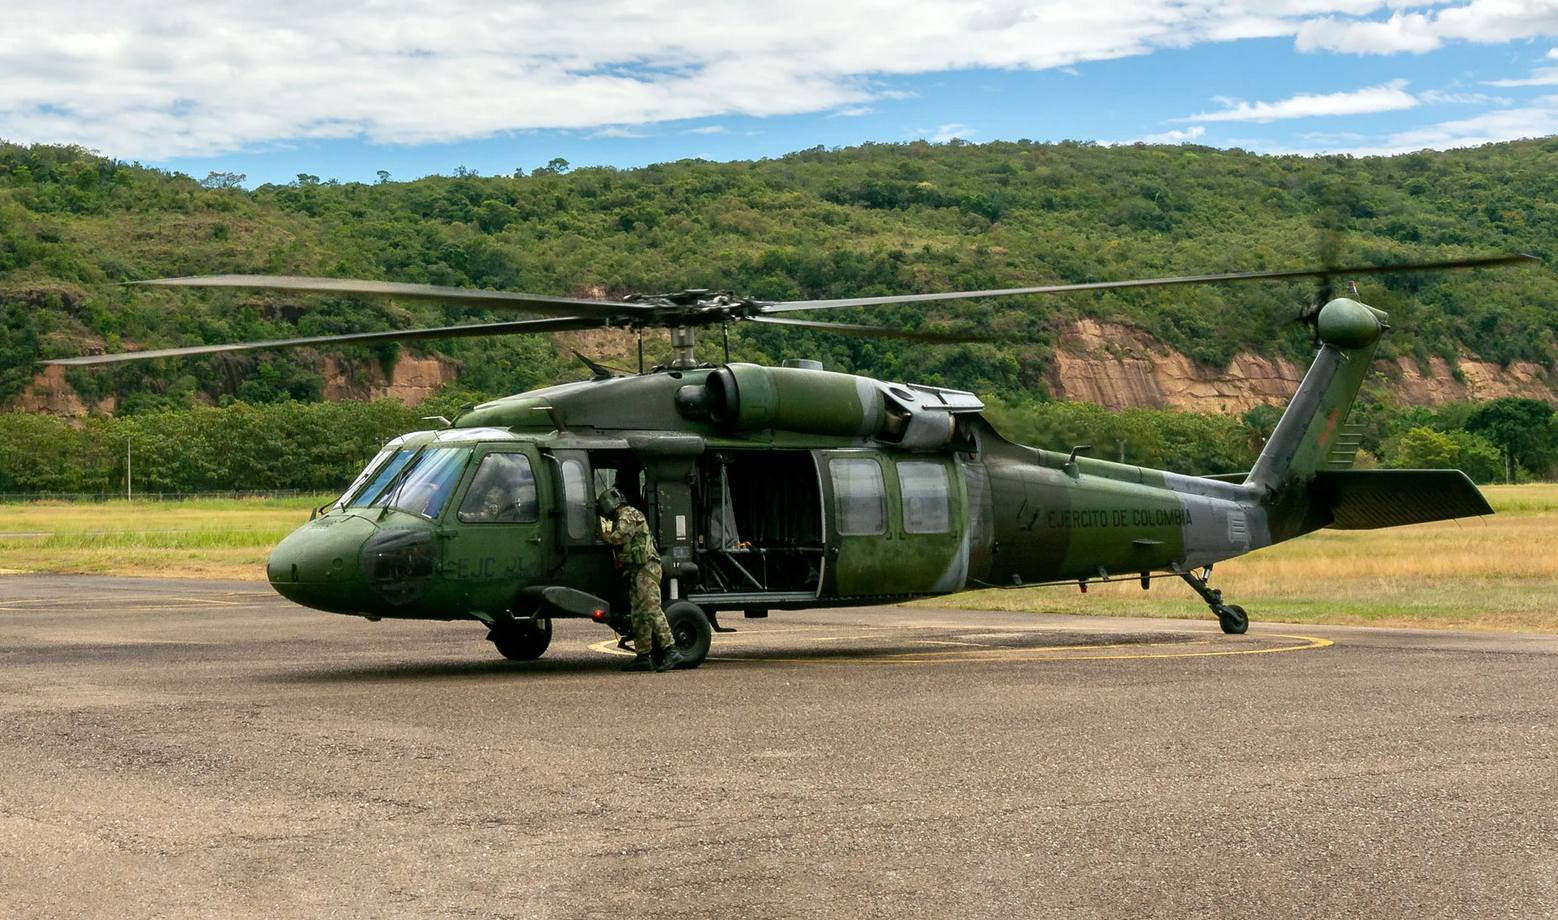 A Colombian Army Black Hawk helicopter is seen grounded in a large open cemented field. The helicopter is painted various hues of dark green as camouflage. A soldier in camouflage is seen standing by the cockpit. "EJERCITO DE COLOMBIA" is seen painted in black on the aircraft's tail boom. The background is a mountain covered by a lush green forest, and a bright blue sky with big white clouds.